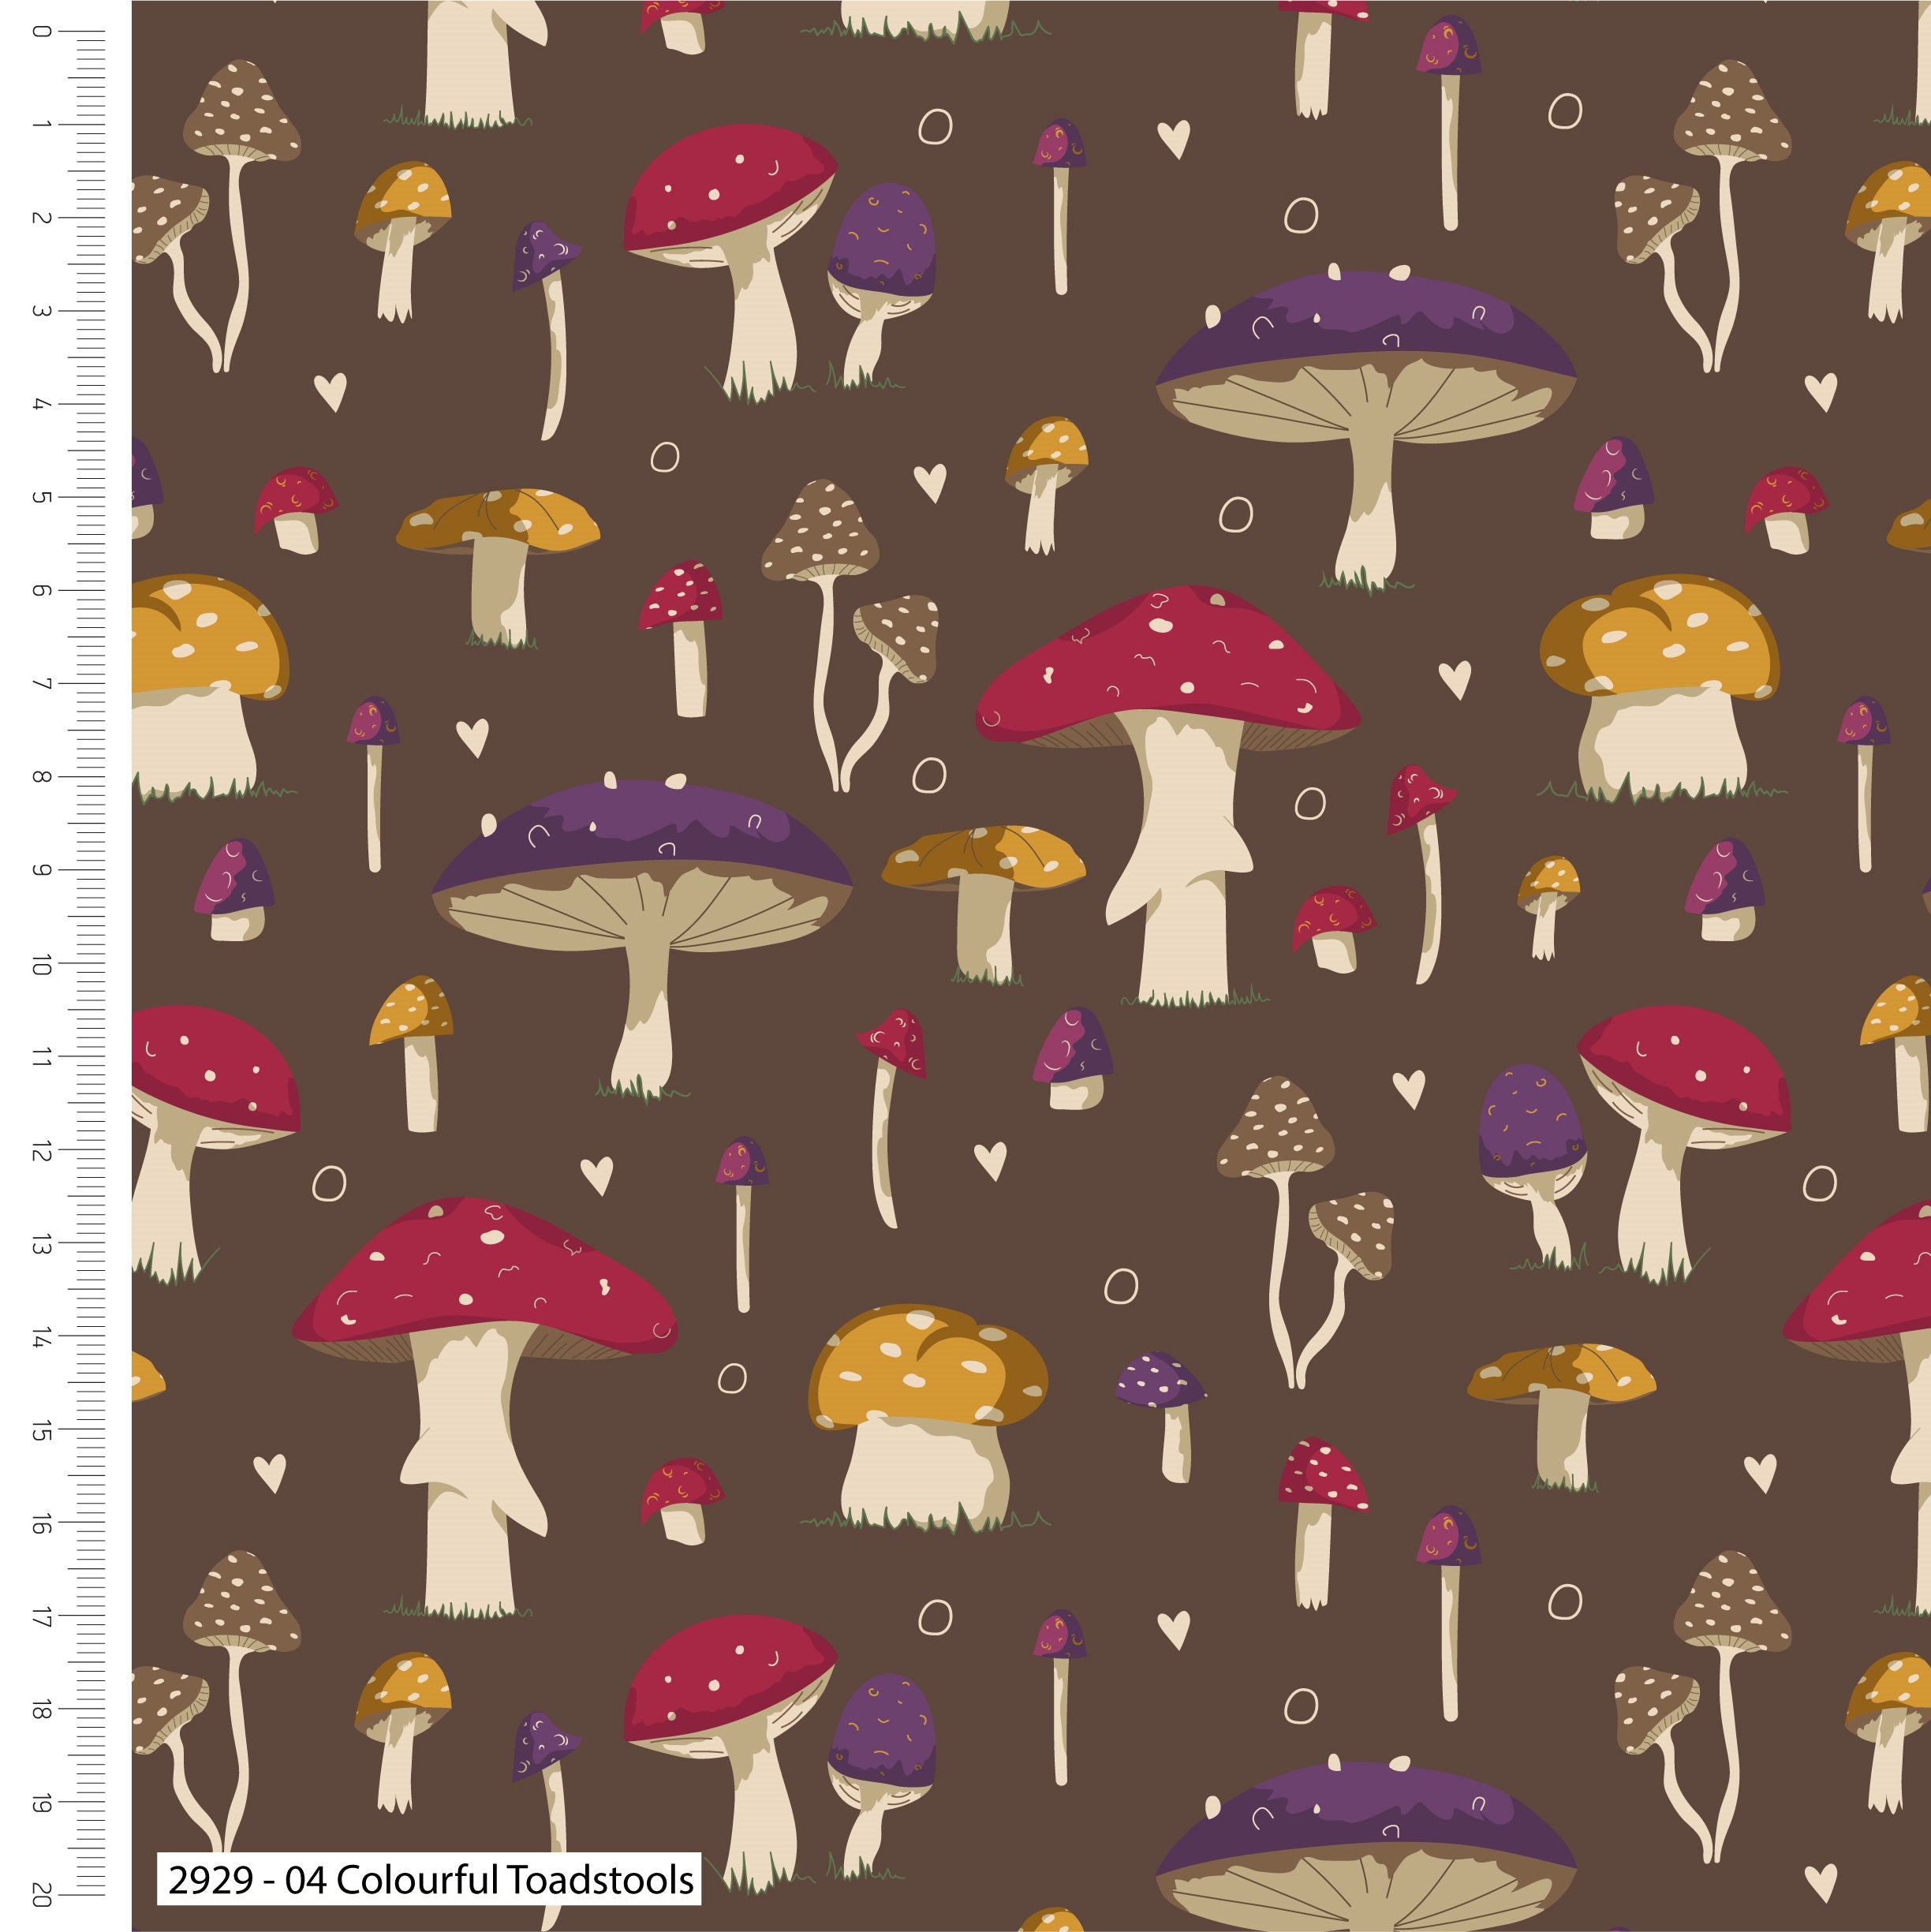 Forest Journal Organic Cotton Fabric, Colourful Toadstools from Jaycotts Sewing Supplies